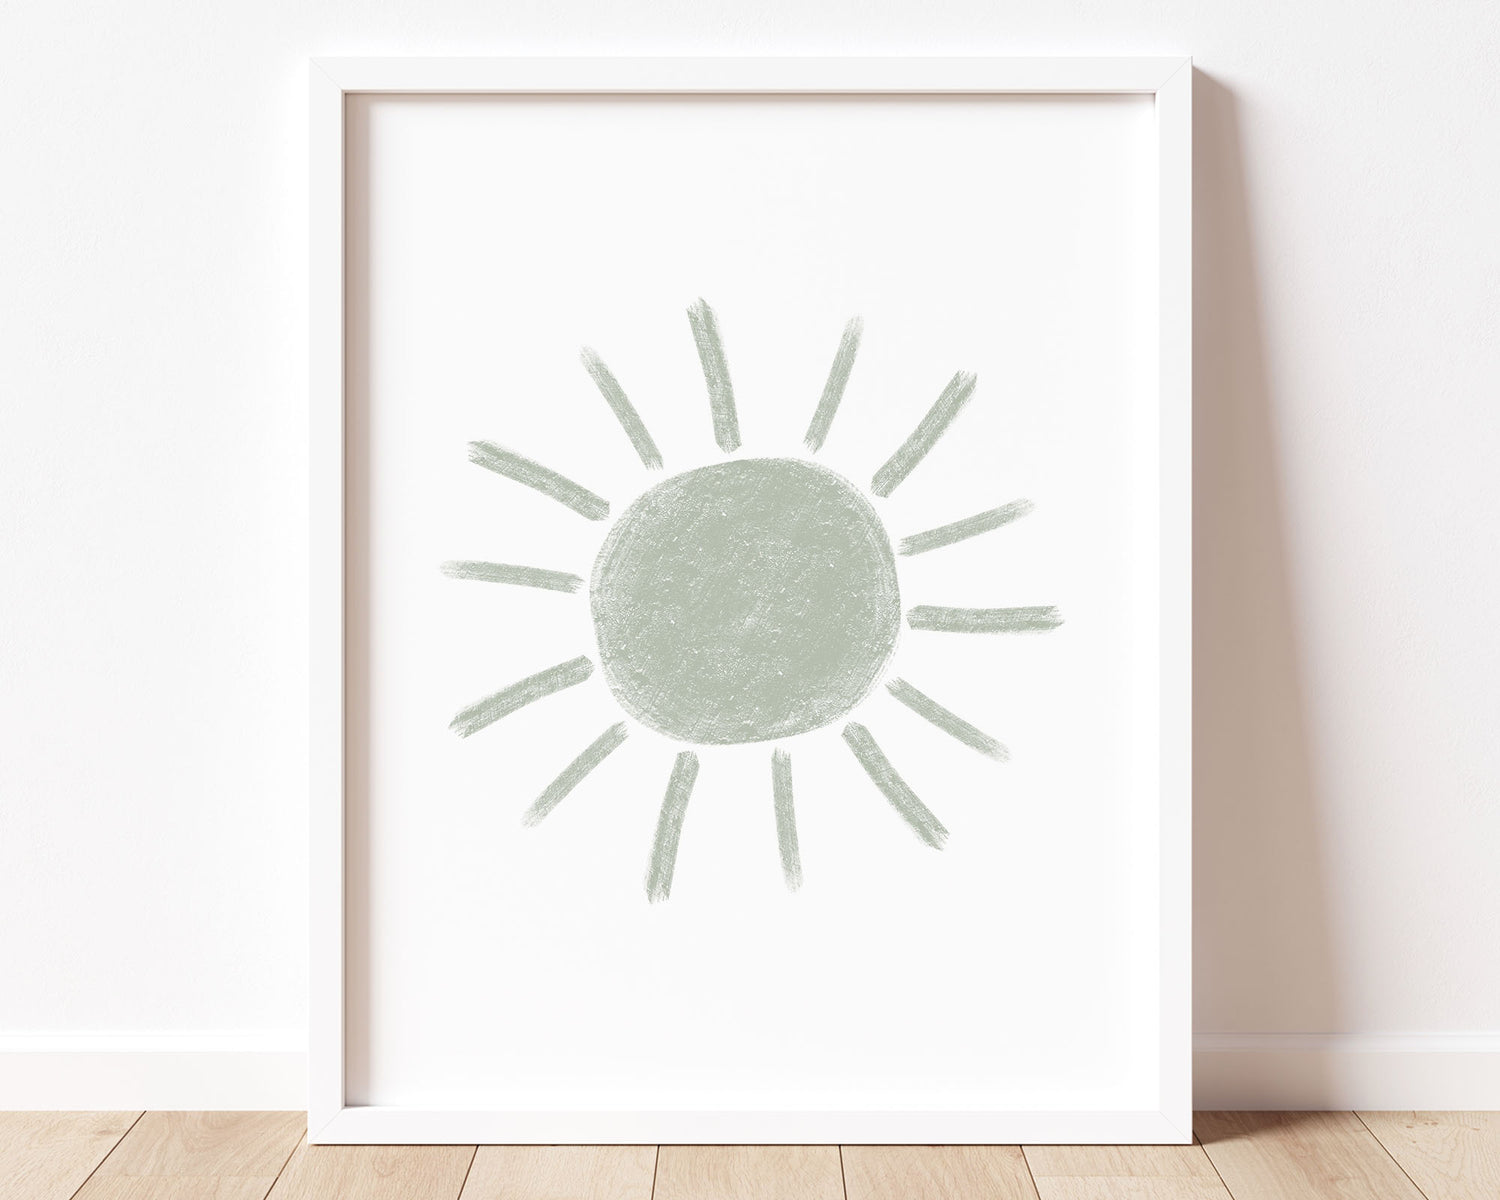 Sage green abstract sun in chalky brushstroke illlustration style perfect for Baby Nursery Décor, Little Boys Bedroom Wall Art, Toddler Girls Room Wall Hangings, Kiddos Bathroom Wall Art and Childrens Playroom Décor.